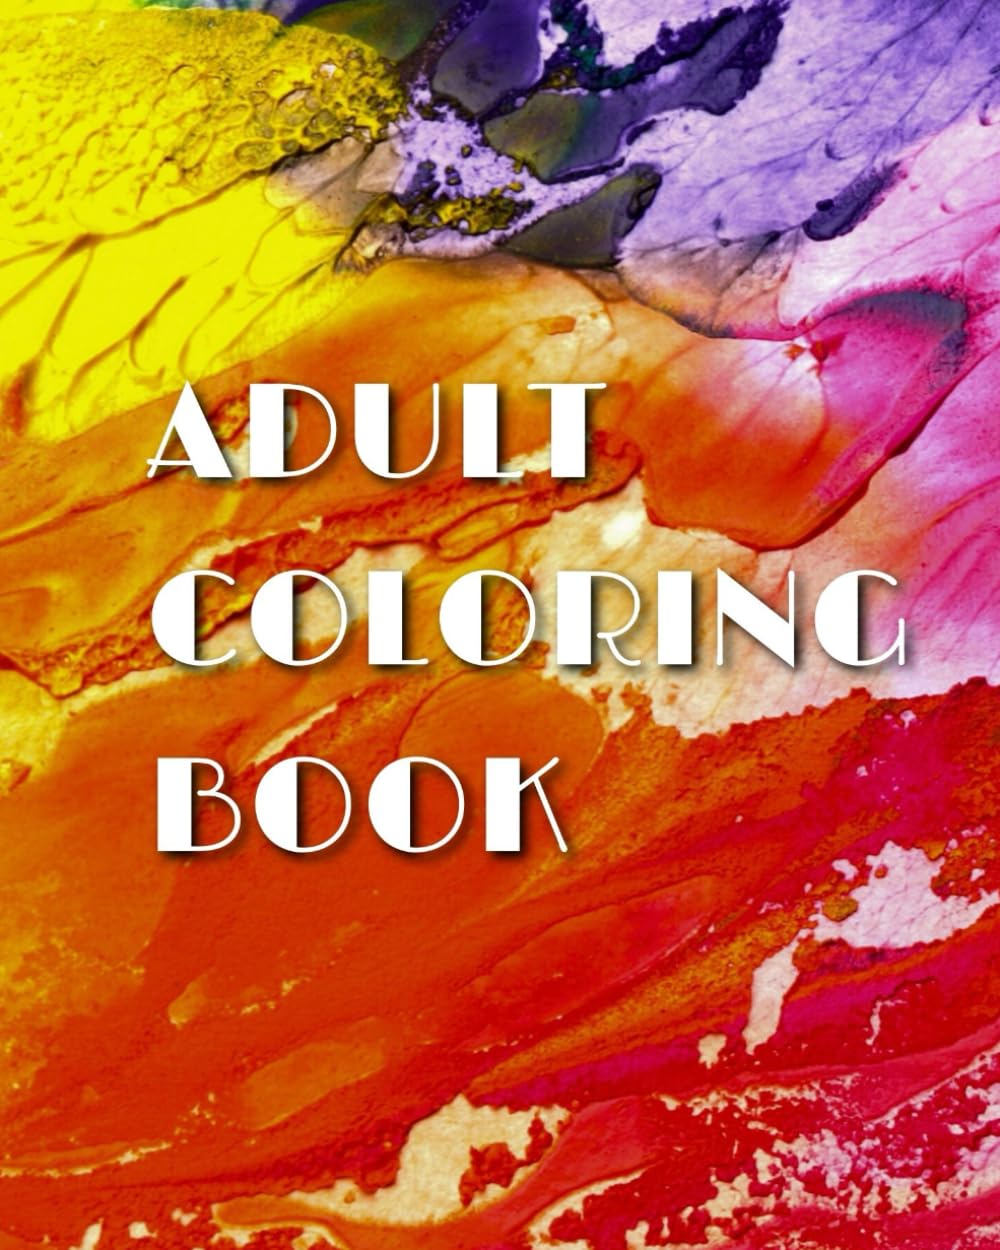 Adult Coloring Book: Stress Relief (Adult Coloring Books - Stress Relief and Self Care) Paperback ©️